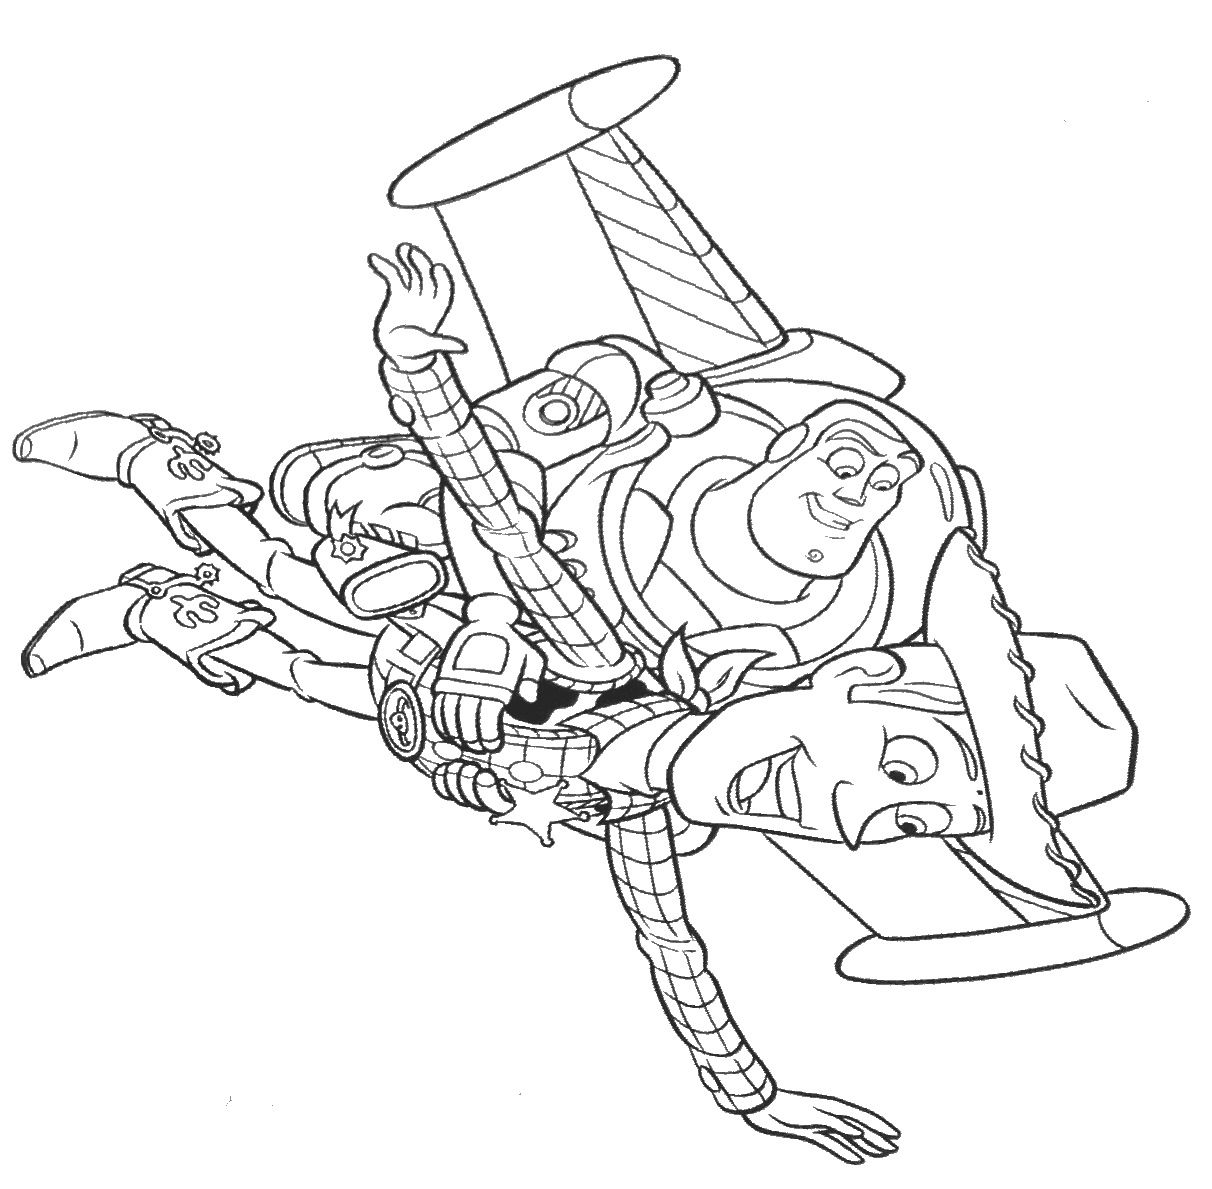 flying buzz lightyear coloring page lightyear flying buzz coloring page lightyear flying buzz coloring page 